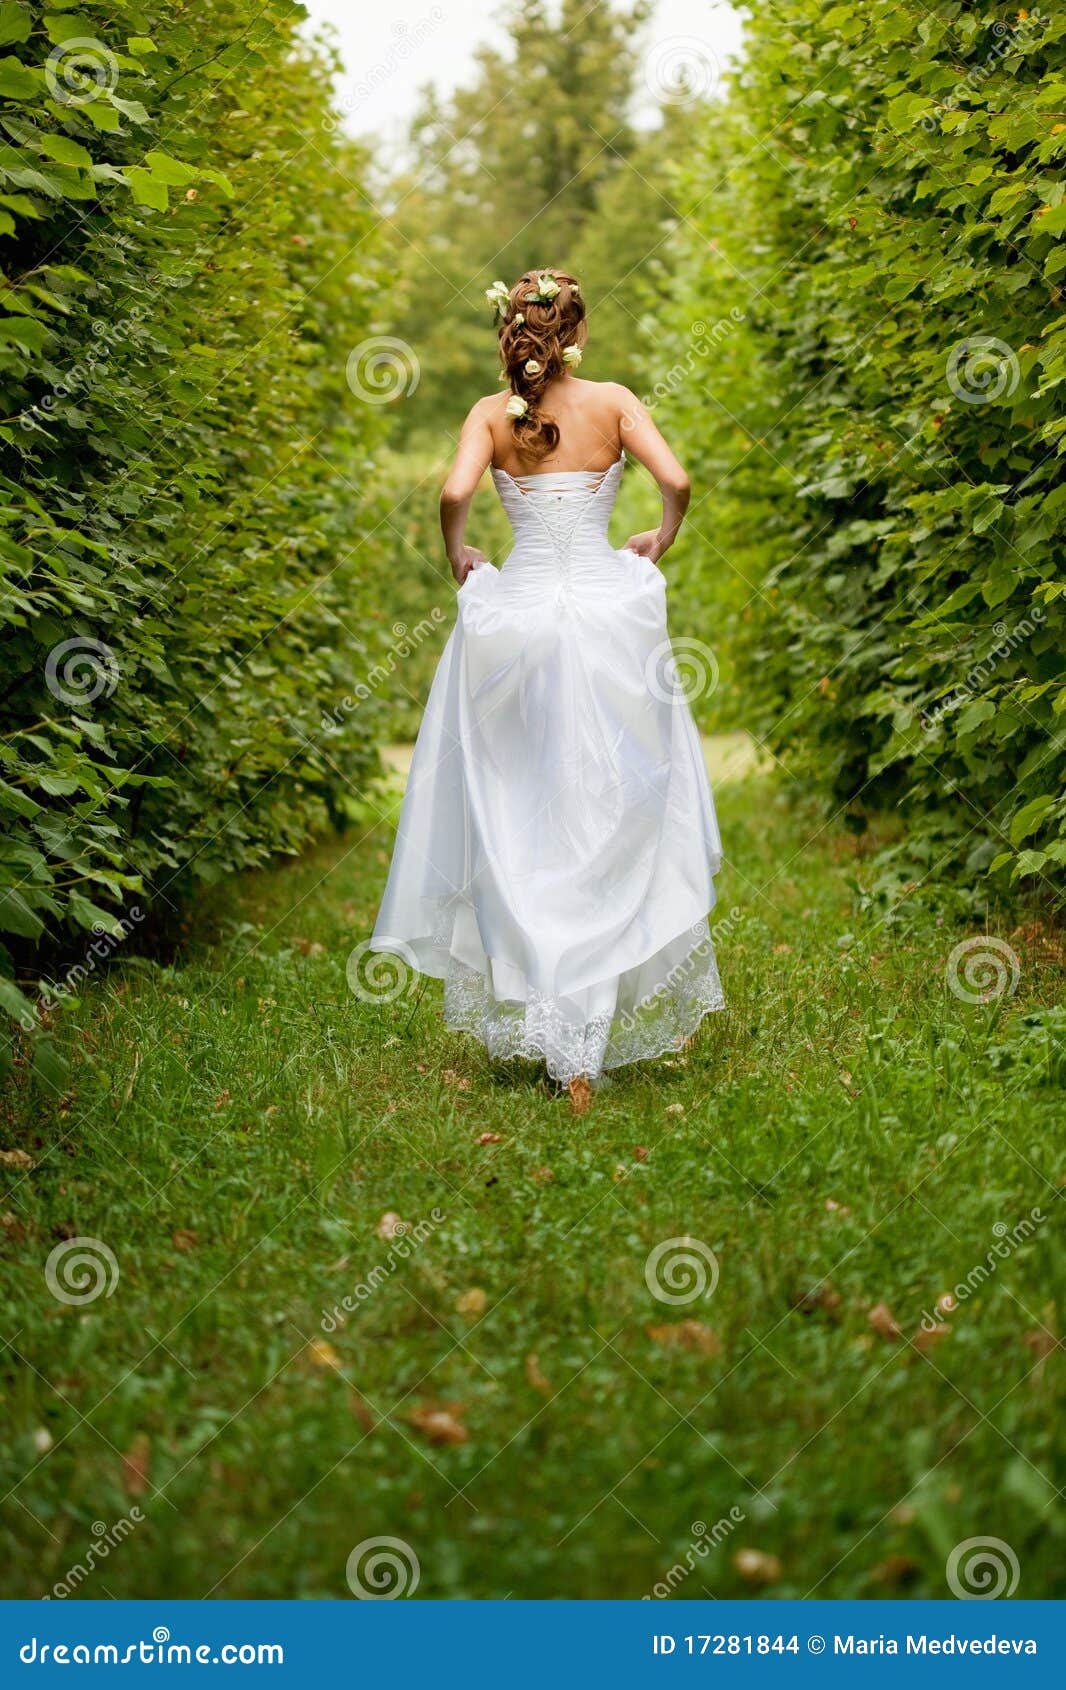 Run away bride stock photo. Image of hairstyle, vertical 